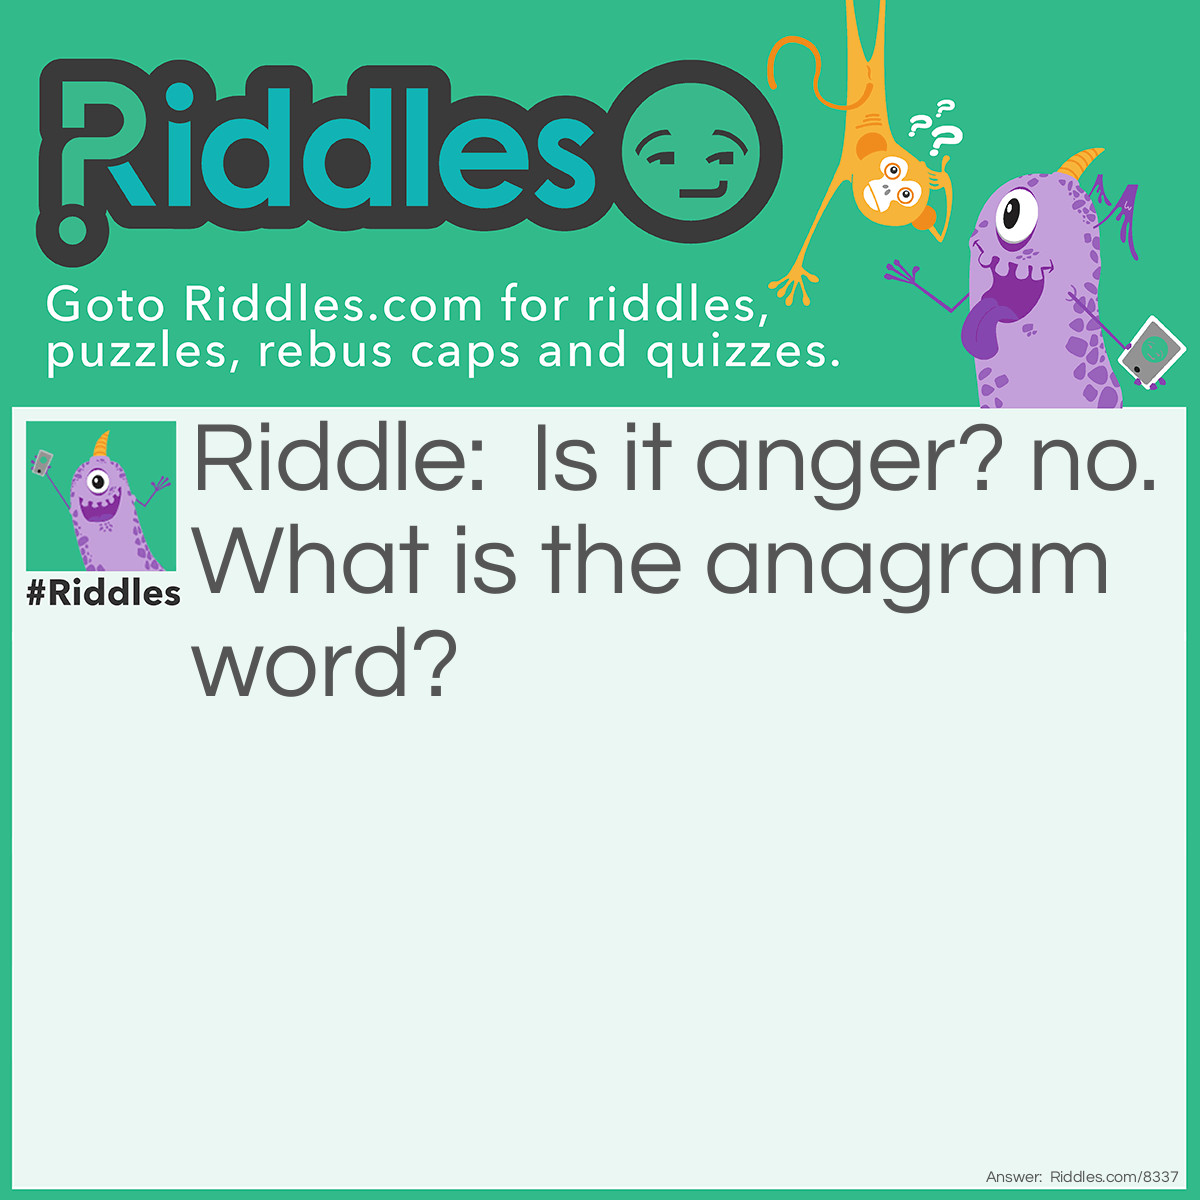 Riddle: Is it anger? no. What is the anagrammed word? Answer: Resignation.